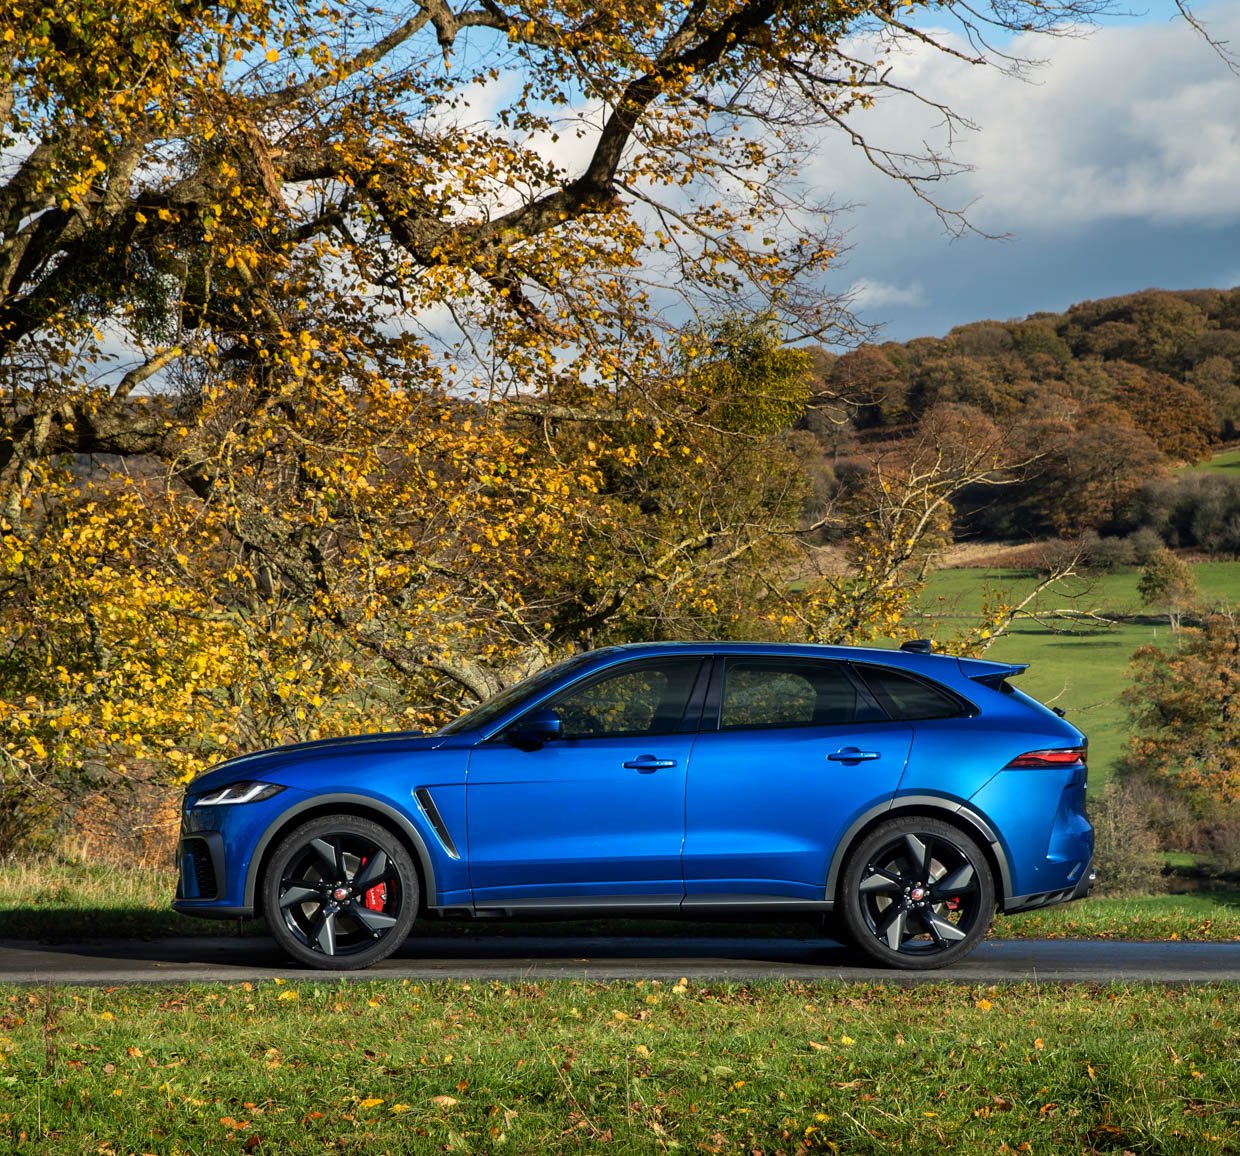 2021 Jaguar F-Pace SVR Does 0-to-60 in Just 3.8 Seconds